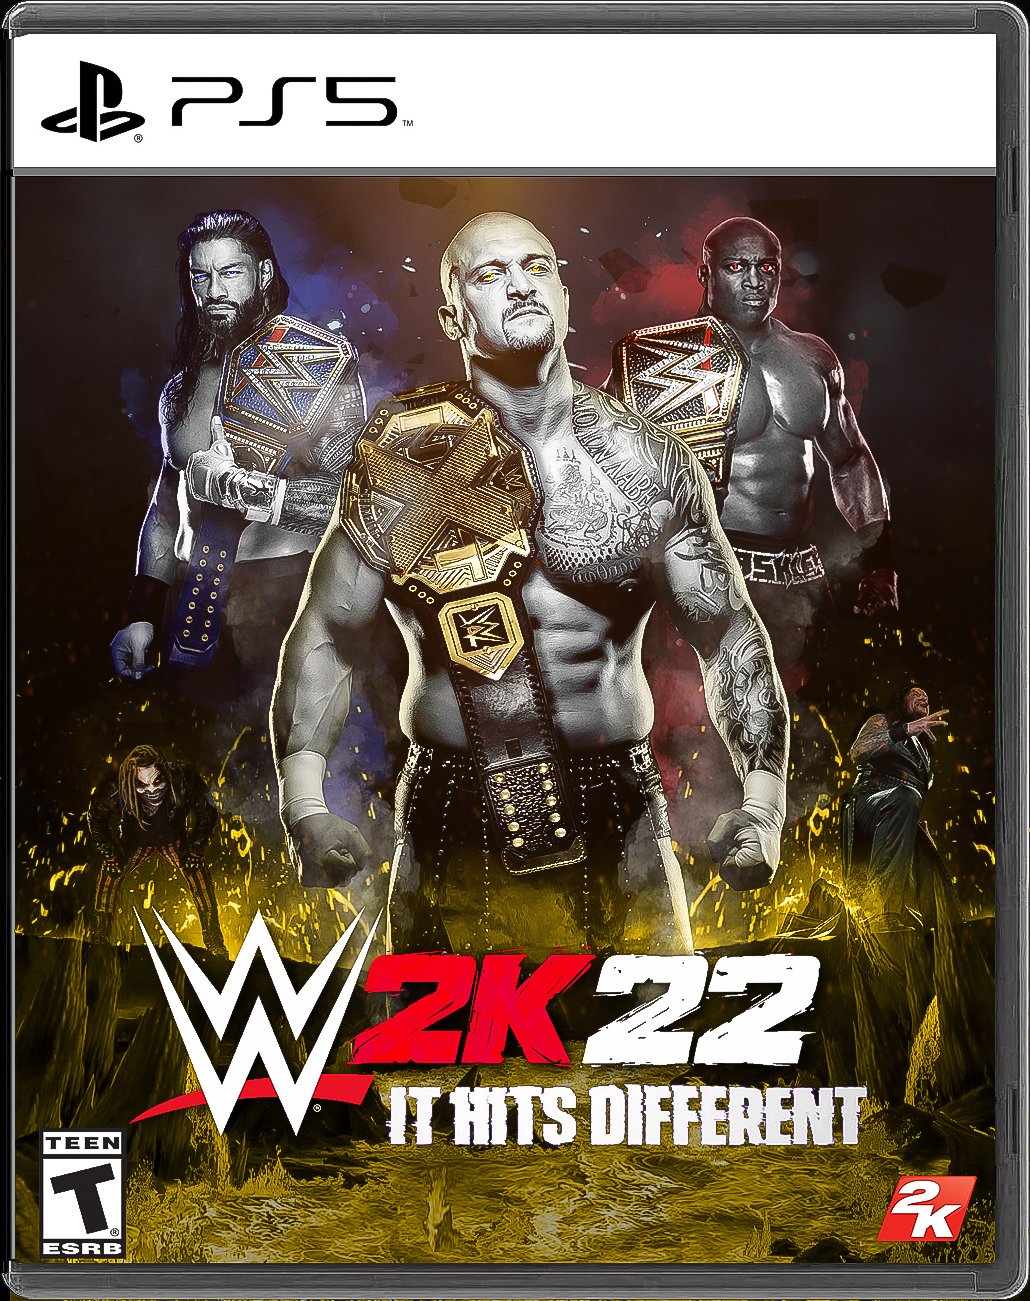 𝕸𝖎𝖘𝖙𝖊𝖗𝕱𝖎𝖊𝖓𝖉𝖃 My Take On The Cover For Wwe 2k22 Decided To Put Nxt Front And Center Has Nothing To Do With Kross Being One Of My Favorites Would Love